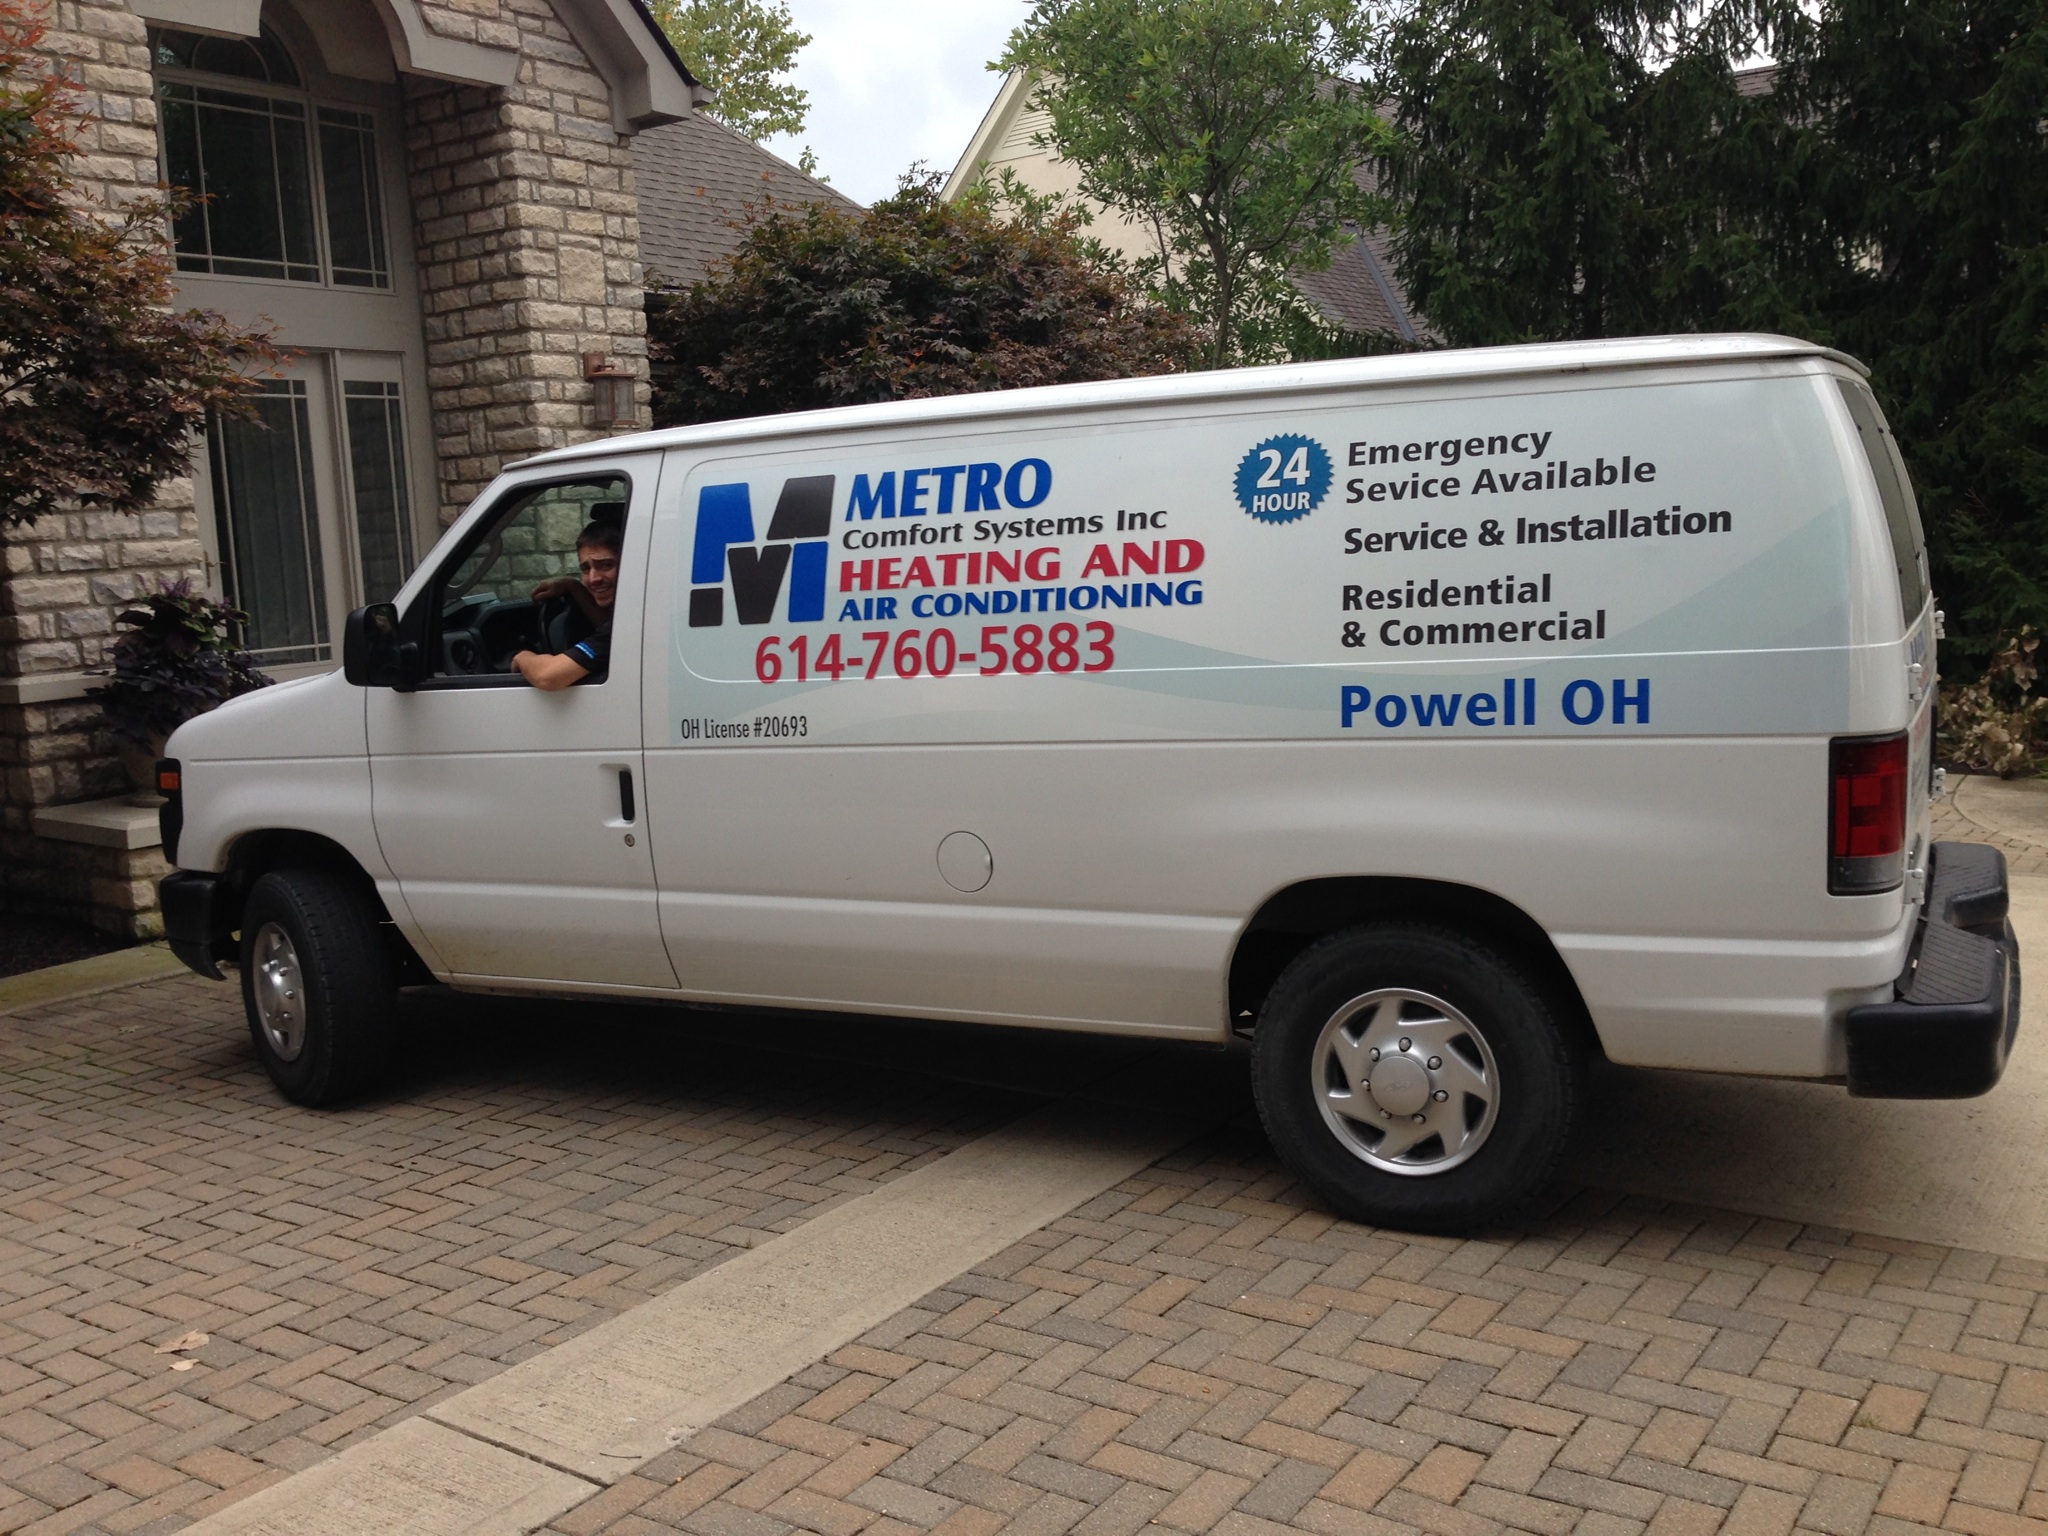 Metro Comfort Systems helps you keep comfortable with reliable service and repairs on your HVAC syst Metro Comfort Systems Heating and Air Conditioning Powell (614)760-5883